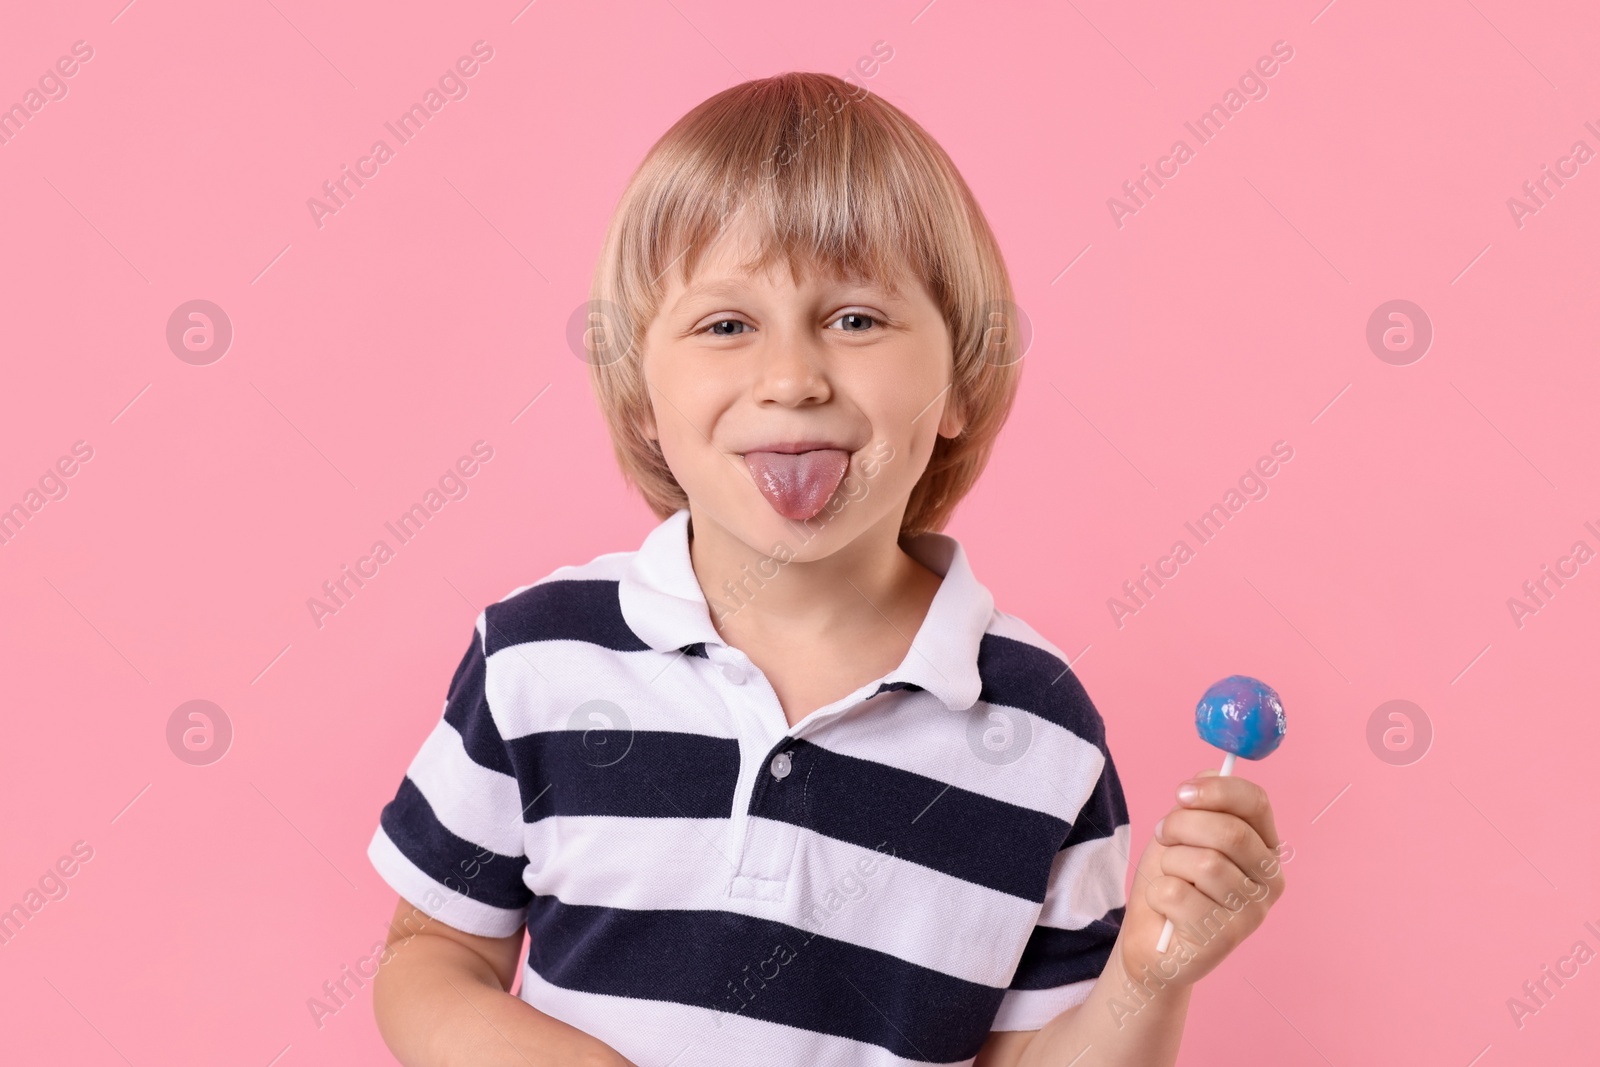 Photo of Funny little boy with lollipop showing tongue on pink background